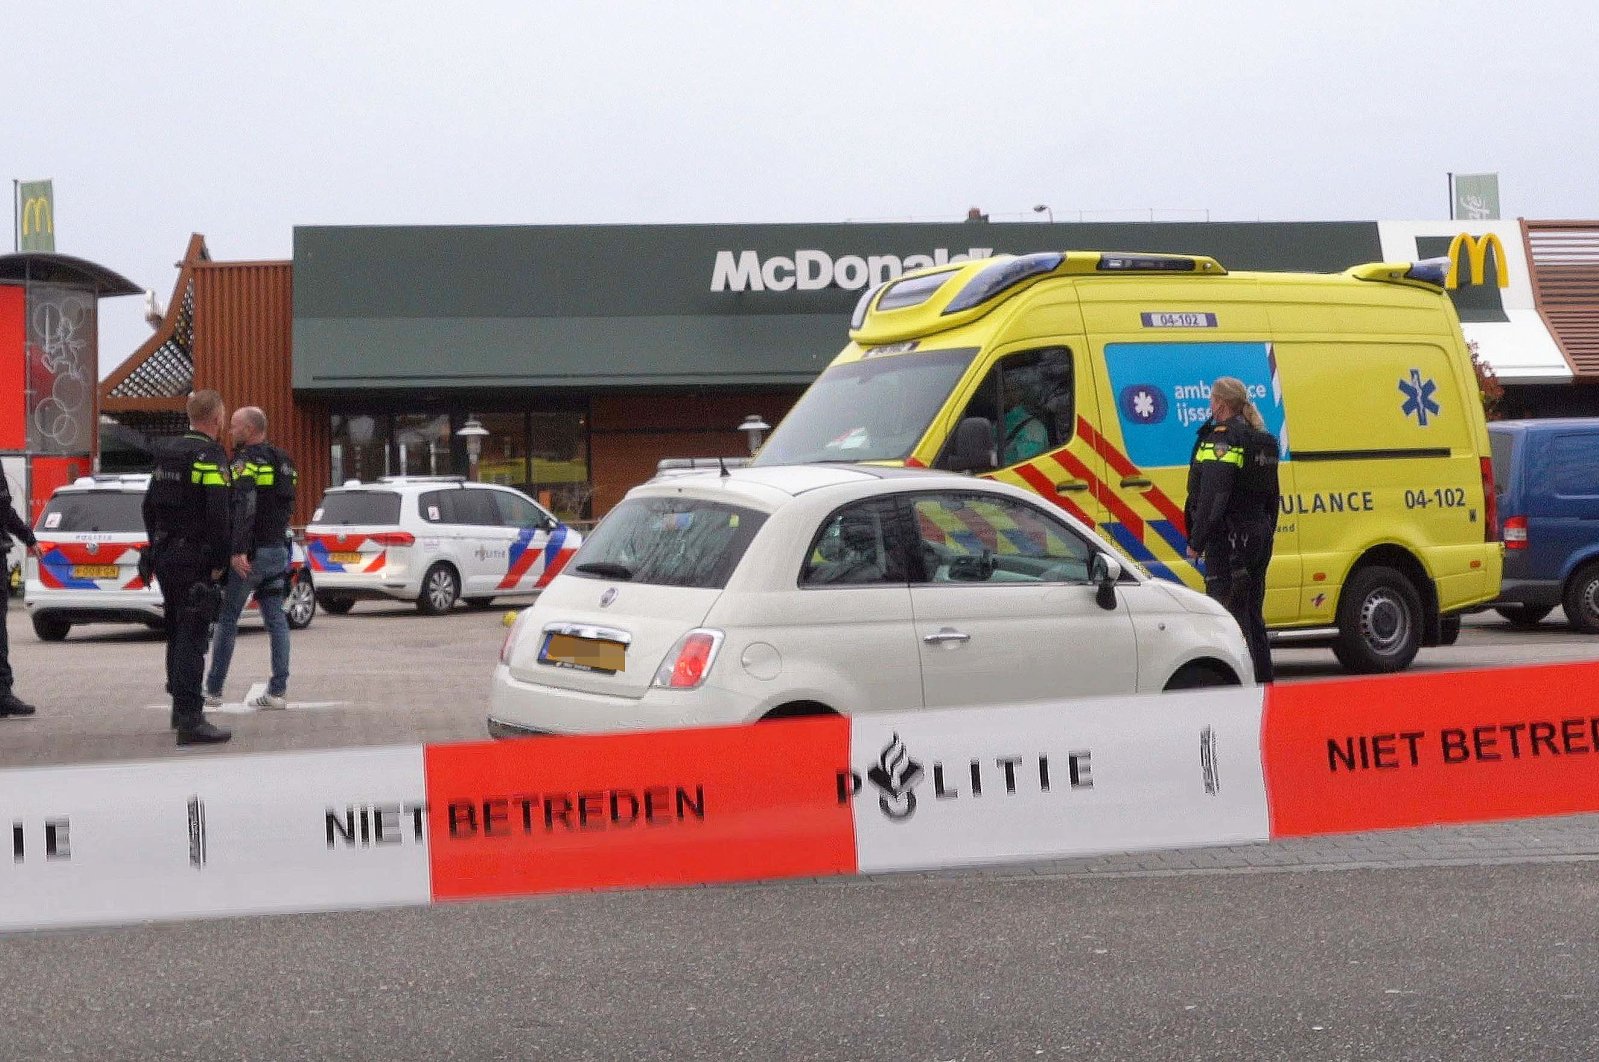 Police officers stand guard outside the restaurant where two people were killed, in Zwolle, the Netherlands, March 30, 2022. (AFP PHOTO)